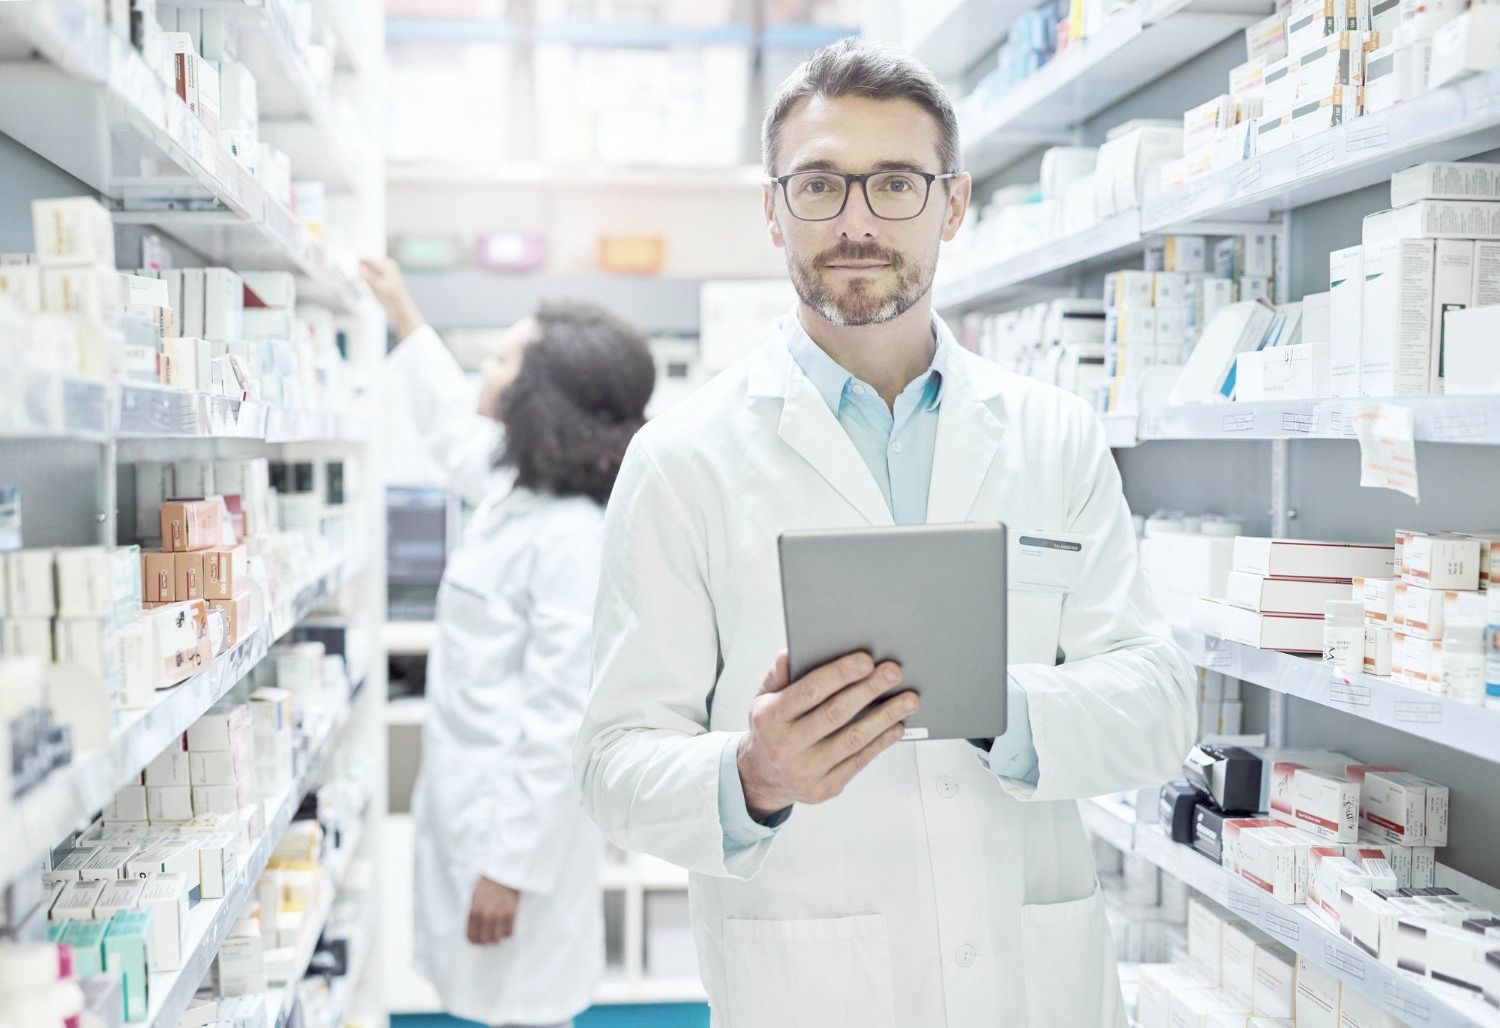 A pharmacist is holding a tablet in a mail-order pharmacy fulfillment center.